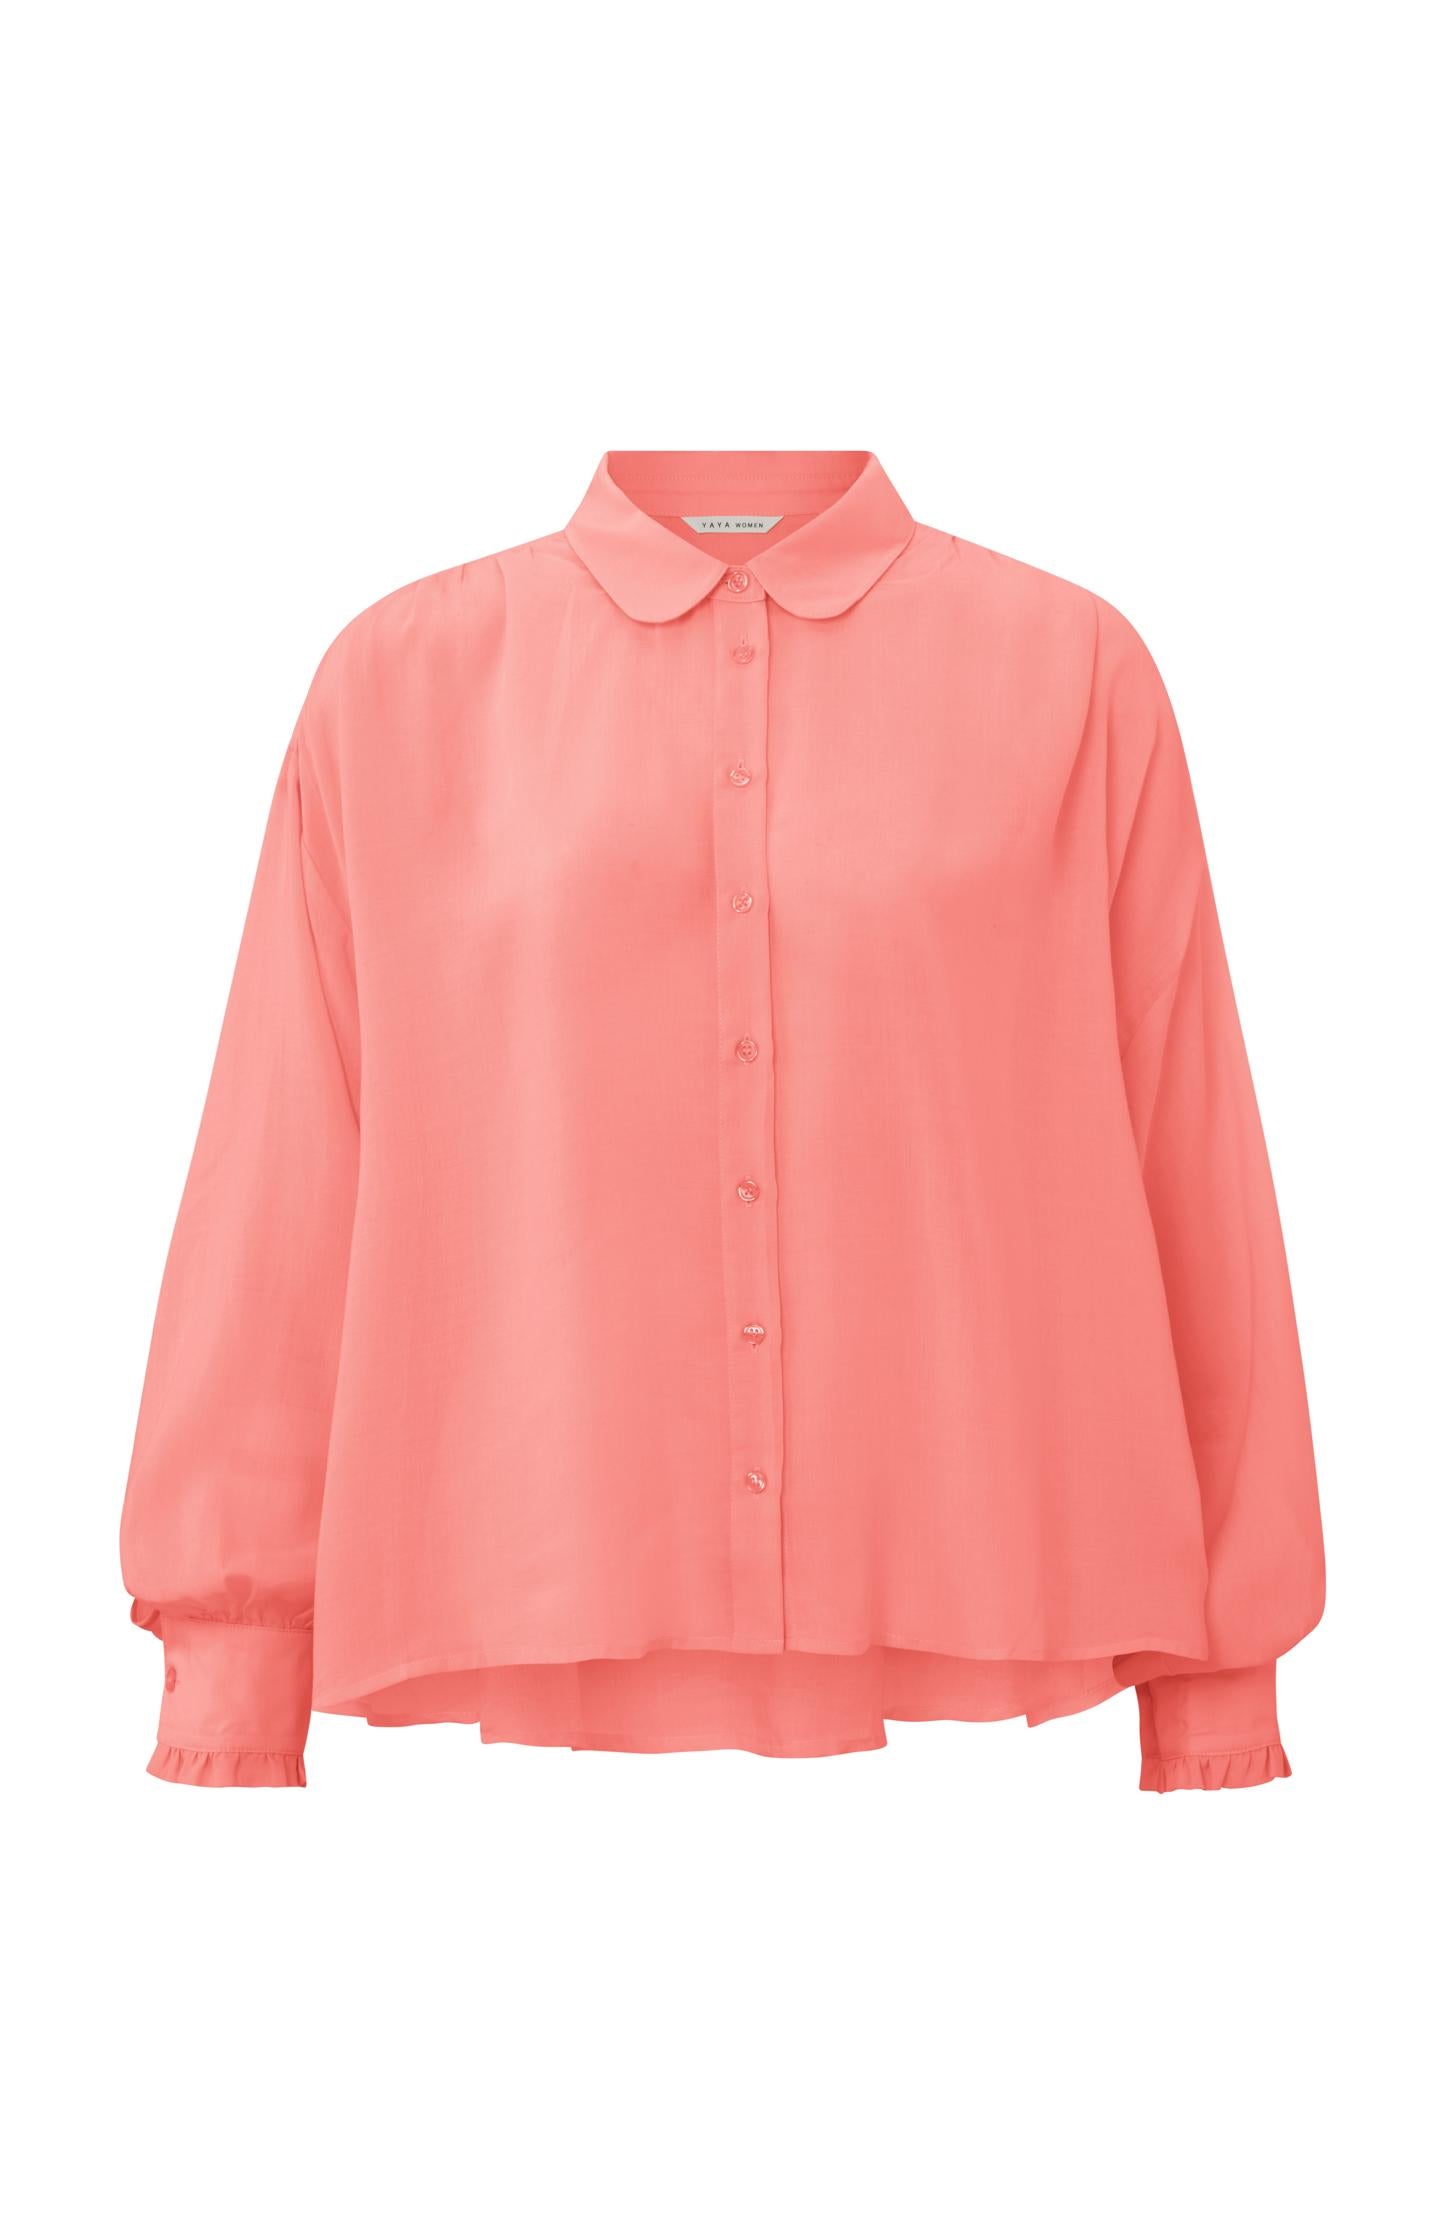 Blouse with long balloon sleeves, buttons and pleated detail - Type: product